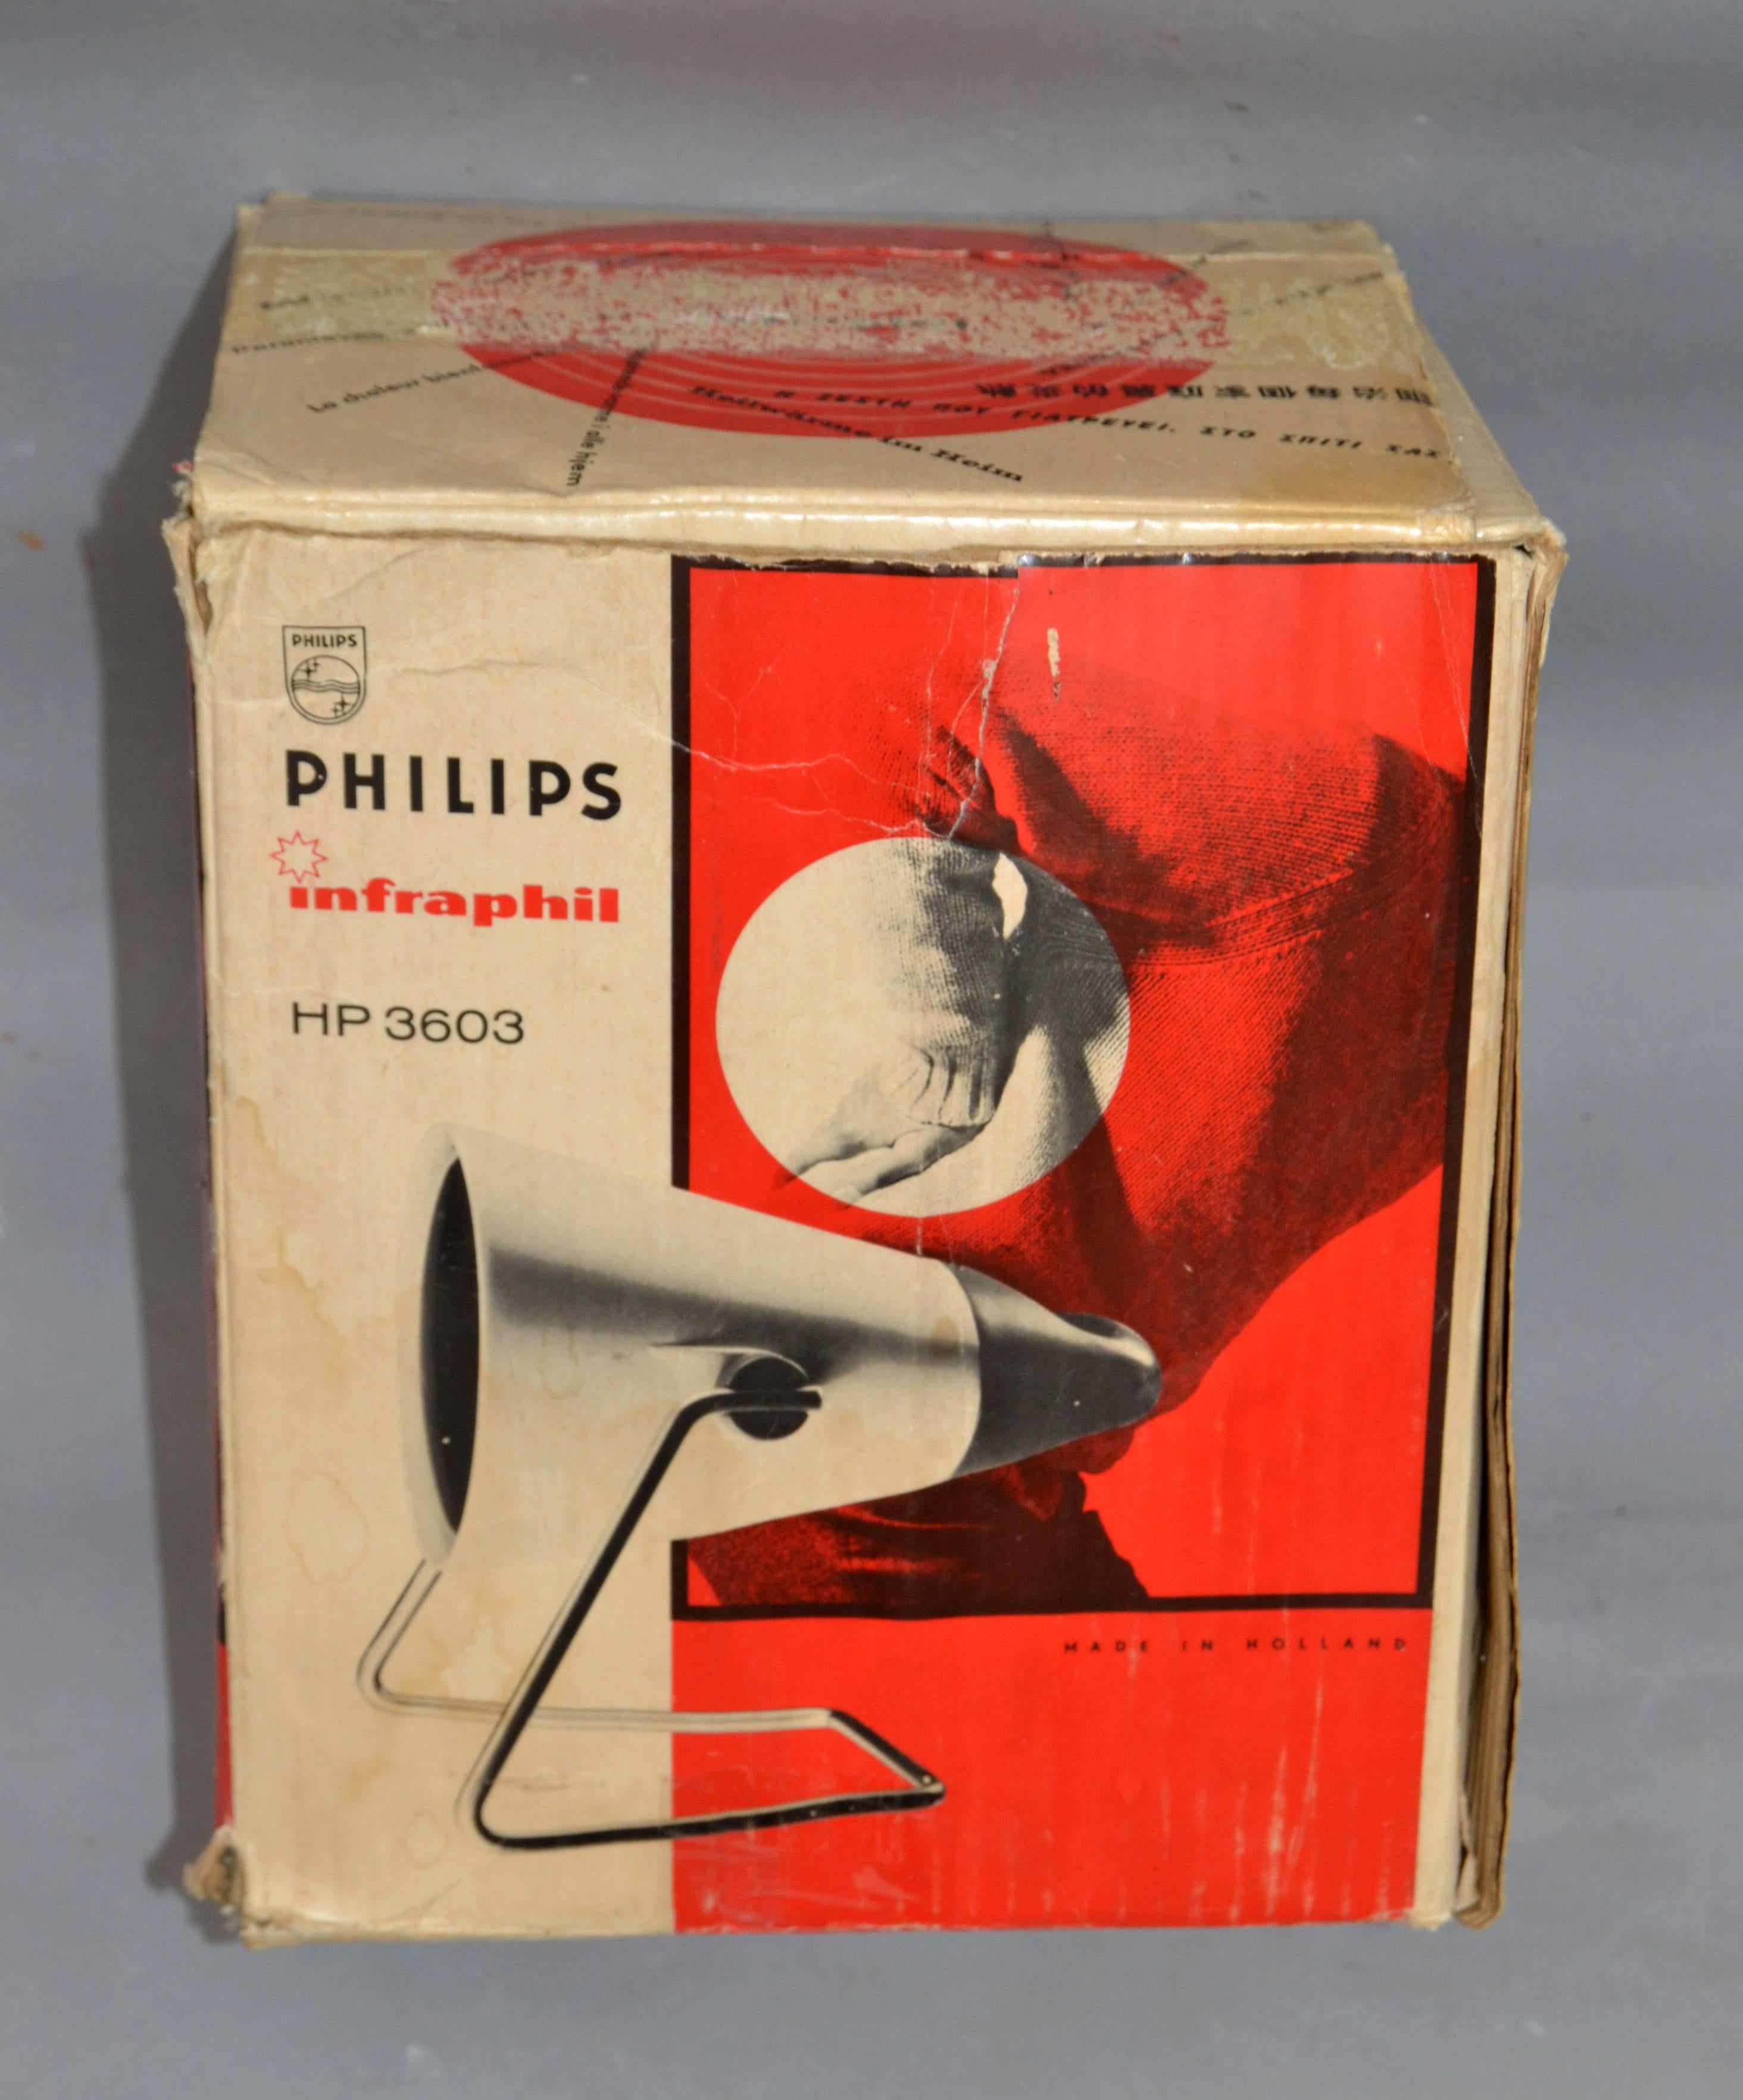 One of 3 Philips Vintage Infrared Heat Lamp Charlotte Perriand HP 3603 Infraphil For Sale 2